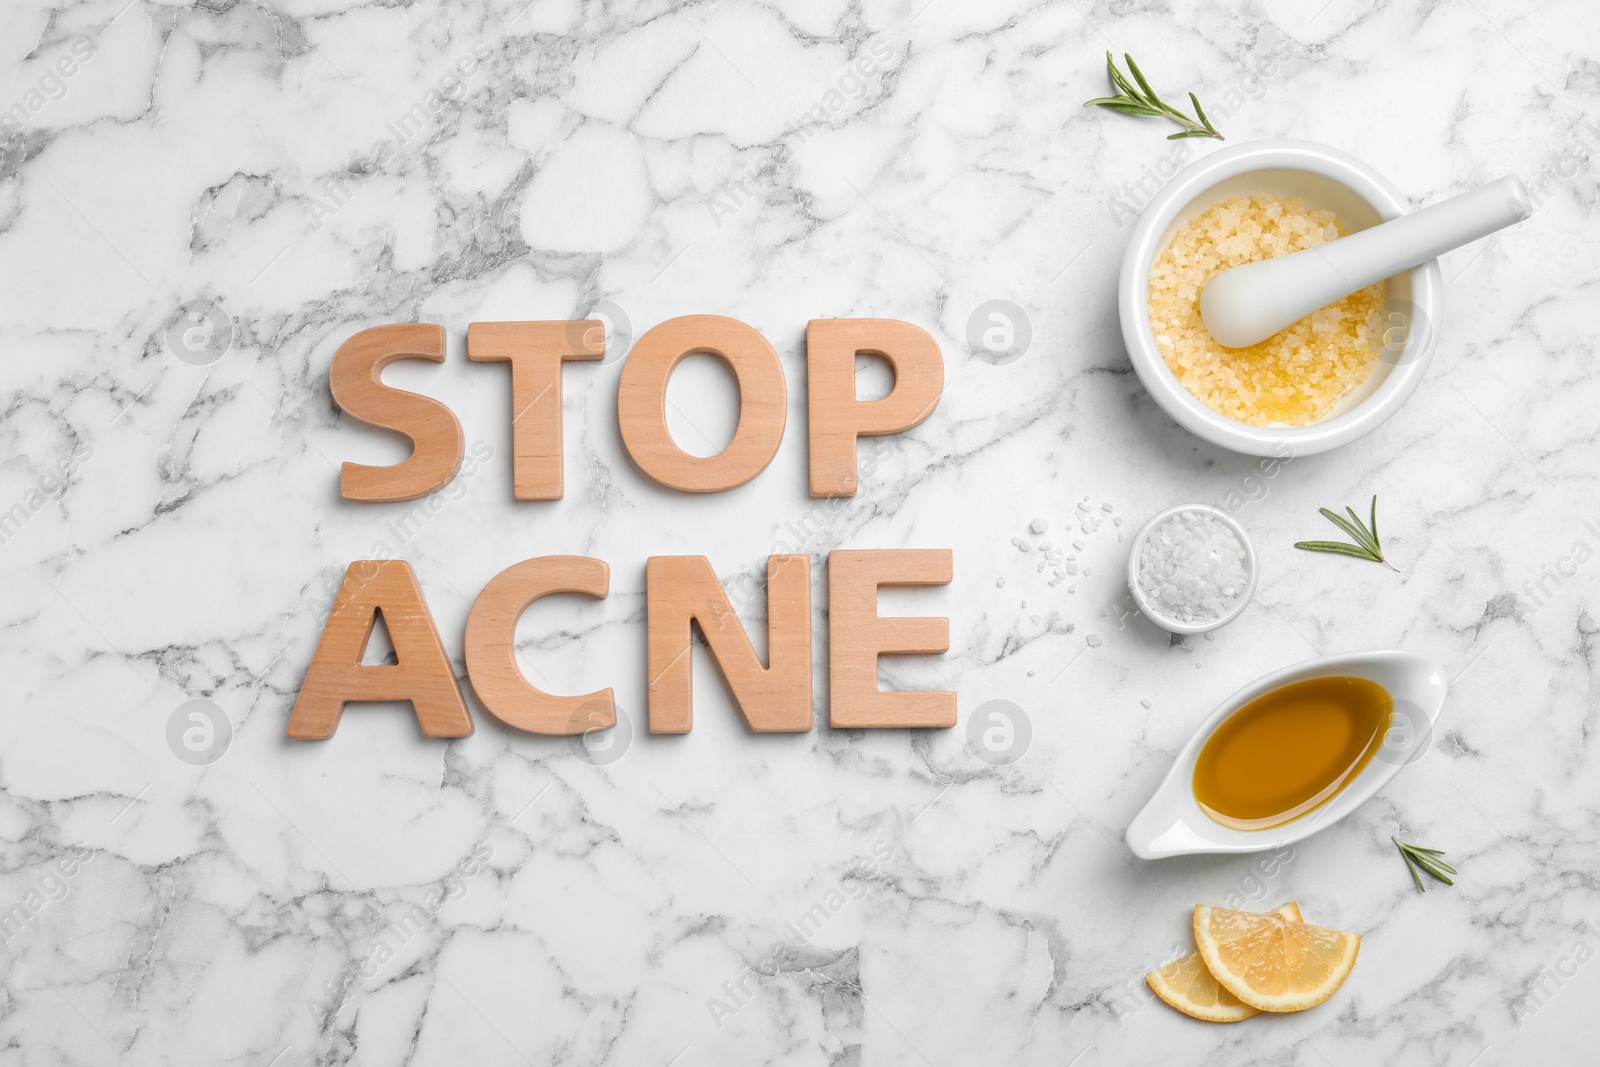 Photo of Phrase "Stop acne" and homemade problem skin remedy ingredients on light background